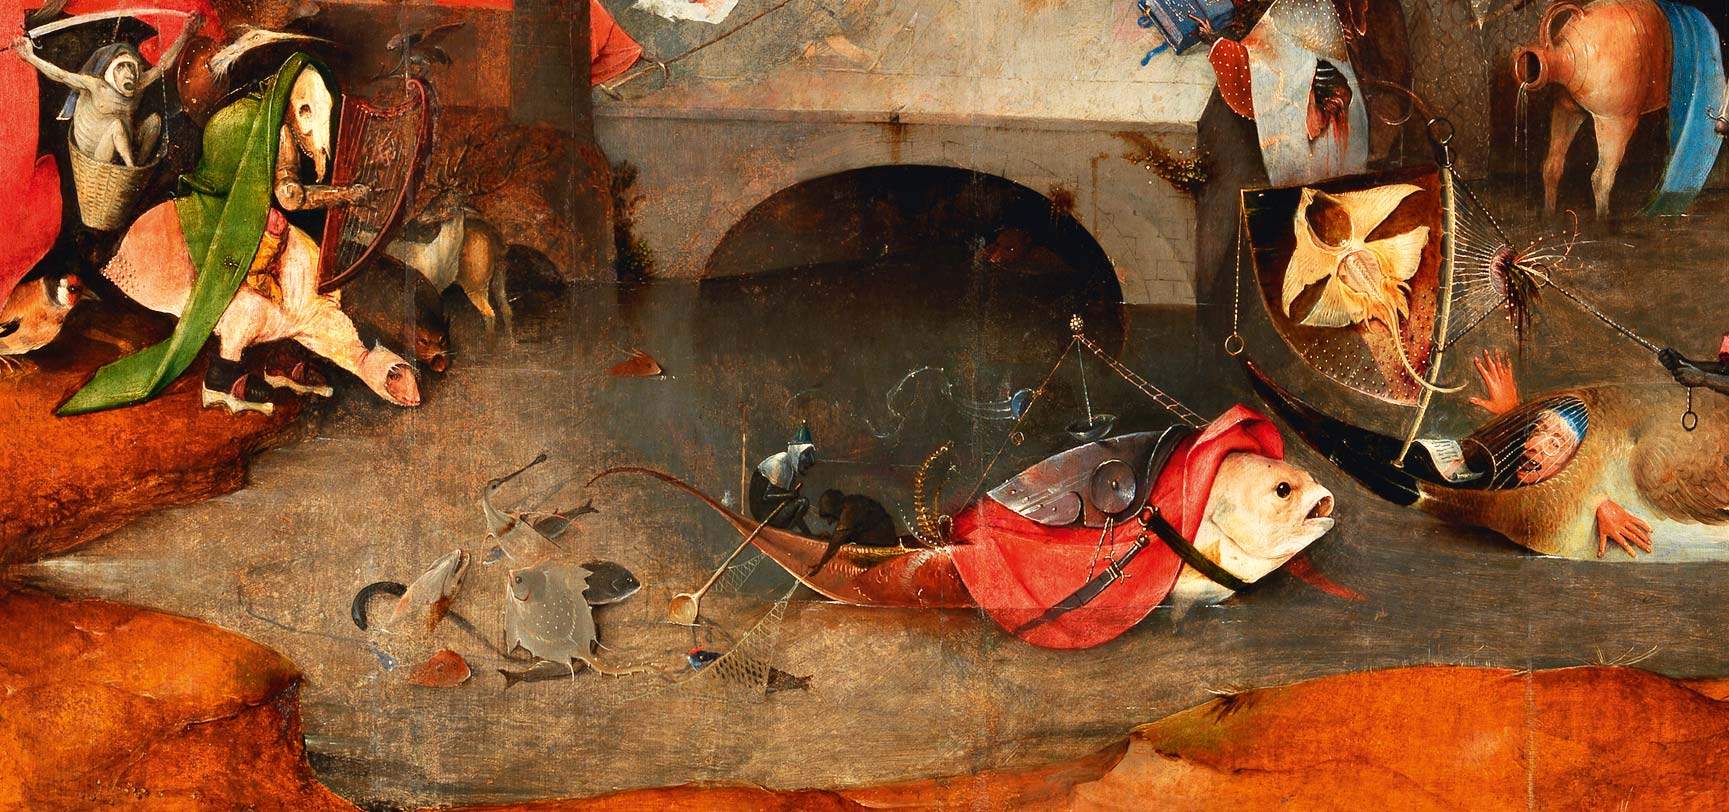 Milan, at Palazzo Reale the great exhibition on Jheronimus Bosch